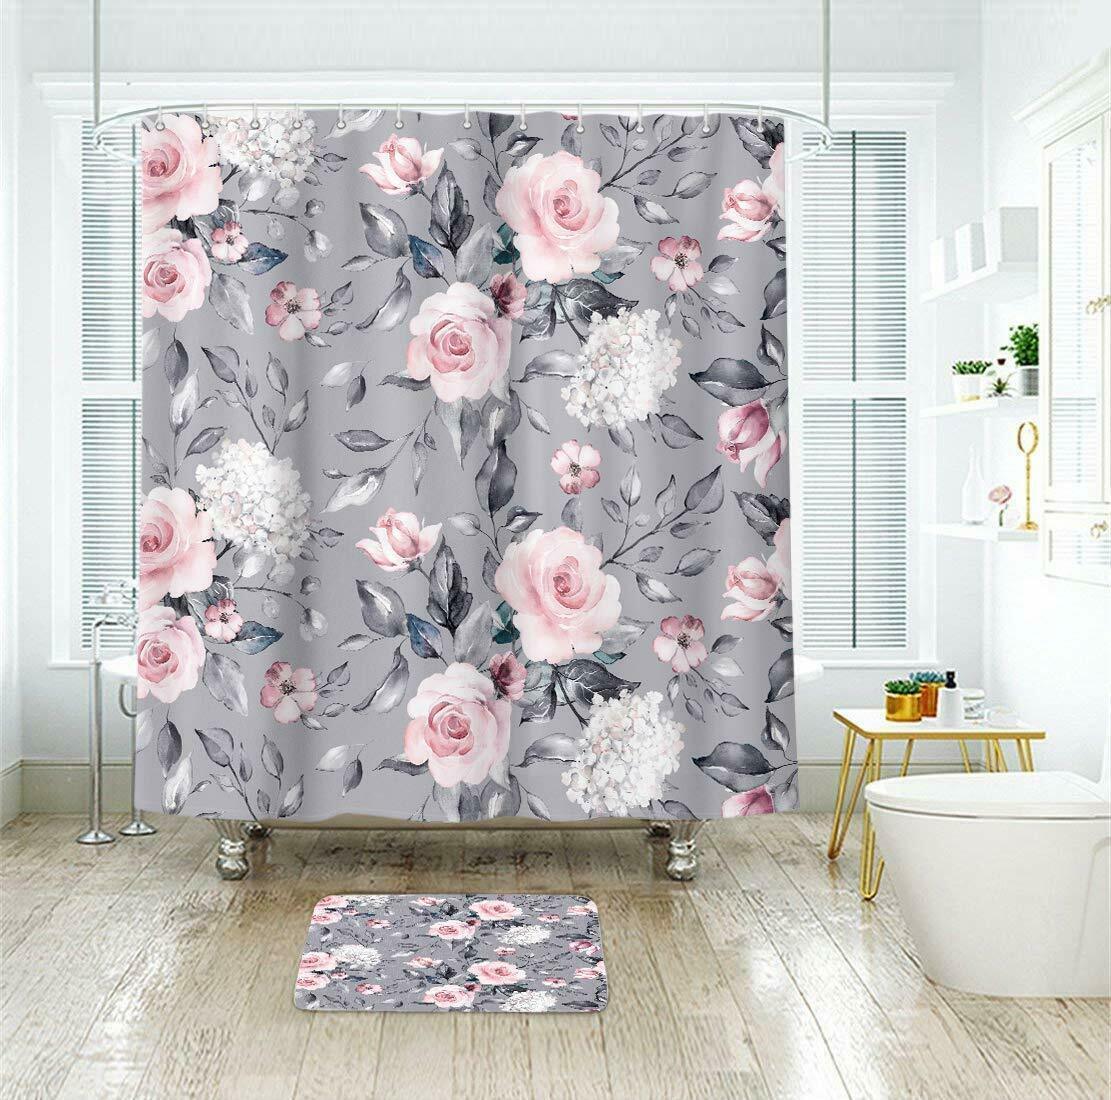 Gray Pink Elegant Floral Farmhouse Shabby Chic Waterproof Fabric Shower ...